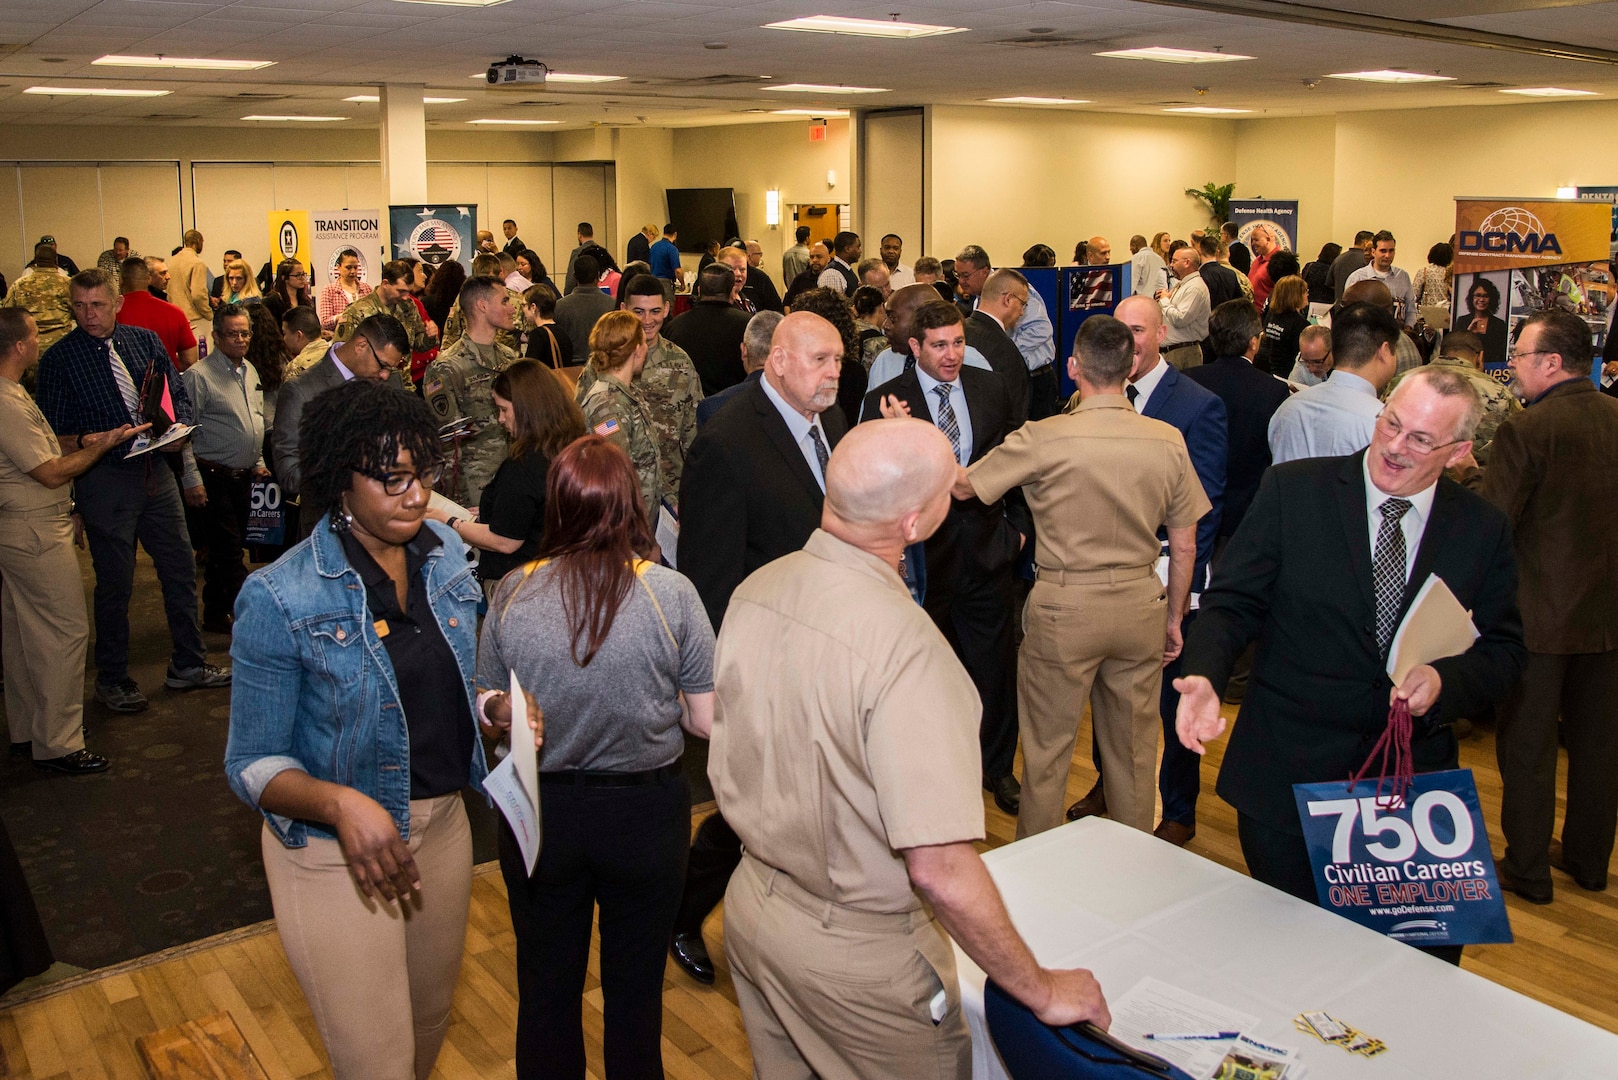 Hundreds of job seekers visited, explored career options with and handed out resumes to Department of Defense employers at the Hiring Heroes Career Fair held in the Sam Houston Community Center at Joint Base San Antonio-Fort Sam Houston March 20.